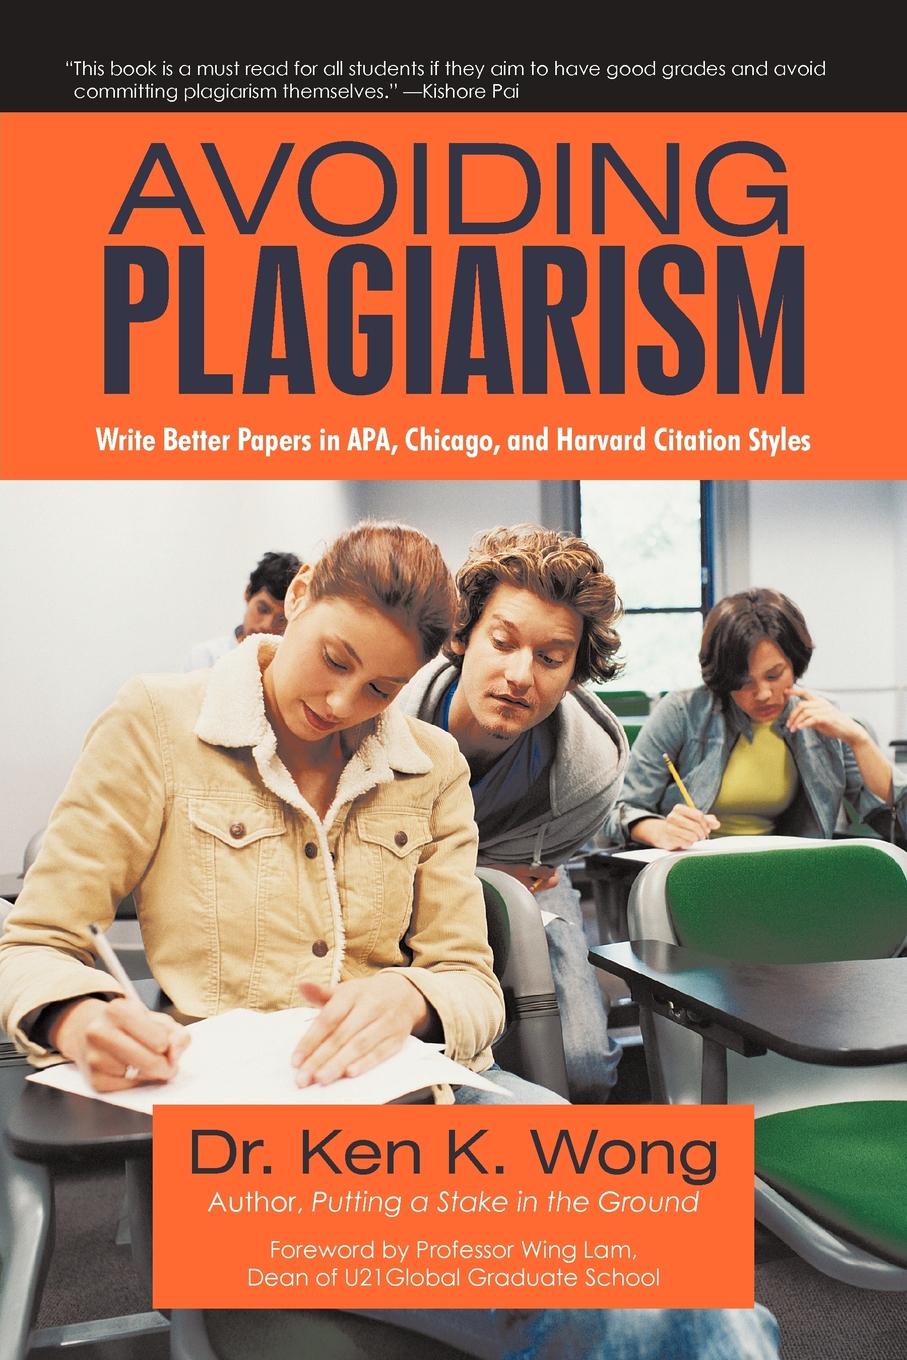 Avoiding Plagiarism. Write Better Papers in APA, Chicago, and Harvard Citation Styles